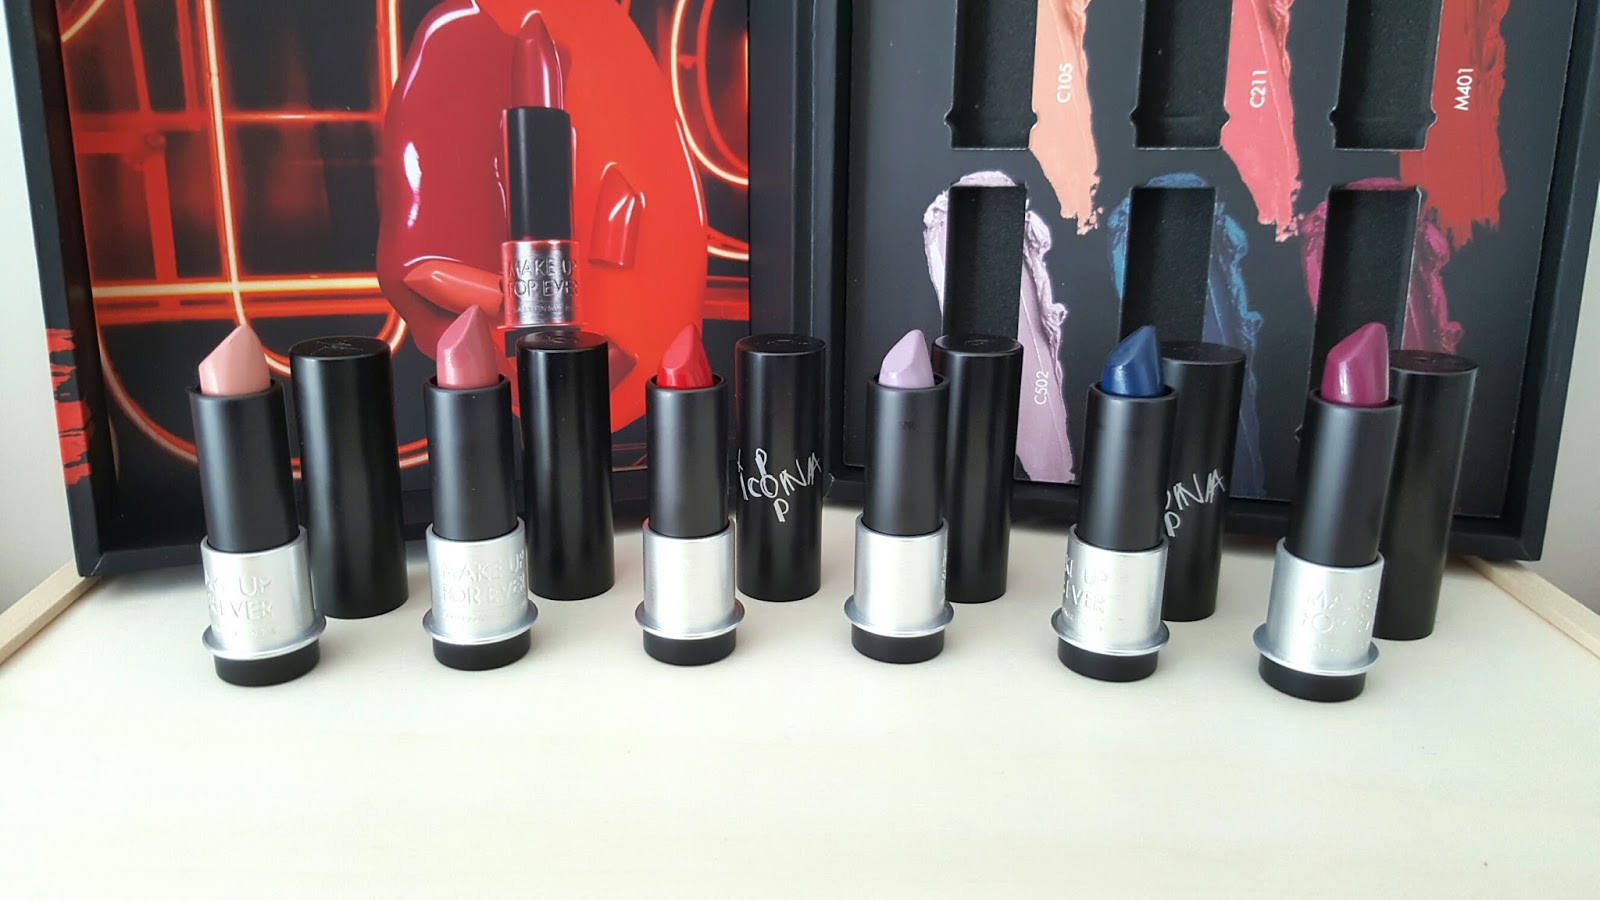 MAKE UP FOR EVER Artist Rouge Lipstick Review & Swatches*, C502, C506 and C603, C105, M401, C211, Make Up For Ever, beauty blogger, beauty blog, canadian beauty blogger, canadian blog, sephora, sephora canada, toronto, toronto blogger